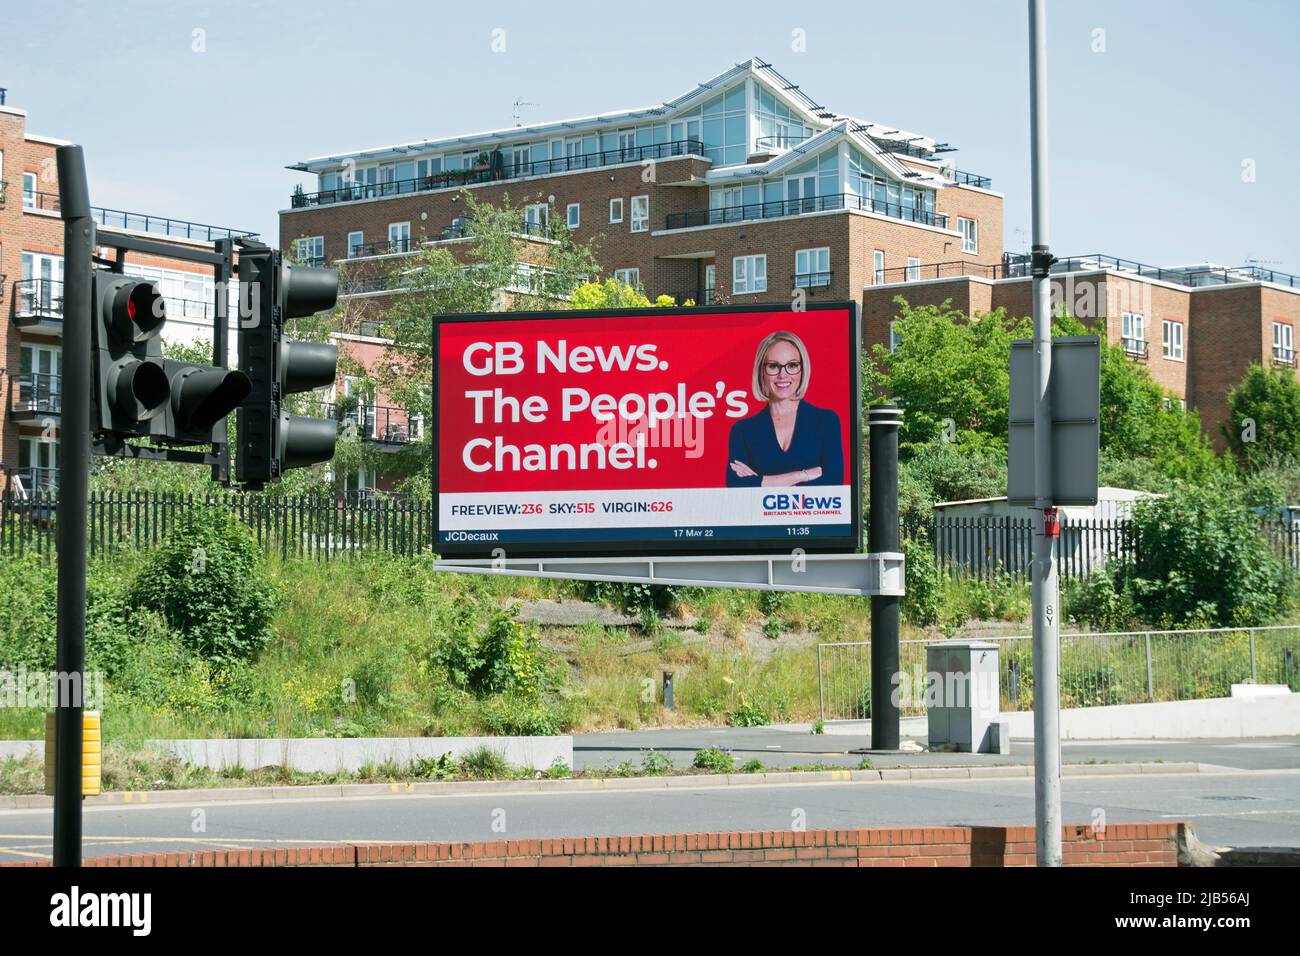 digital billboard advert for british television channel gb news, self-styled as the people's channel, in kingston upon thames, surrey, england Stock Photo